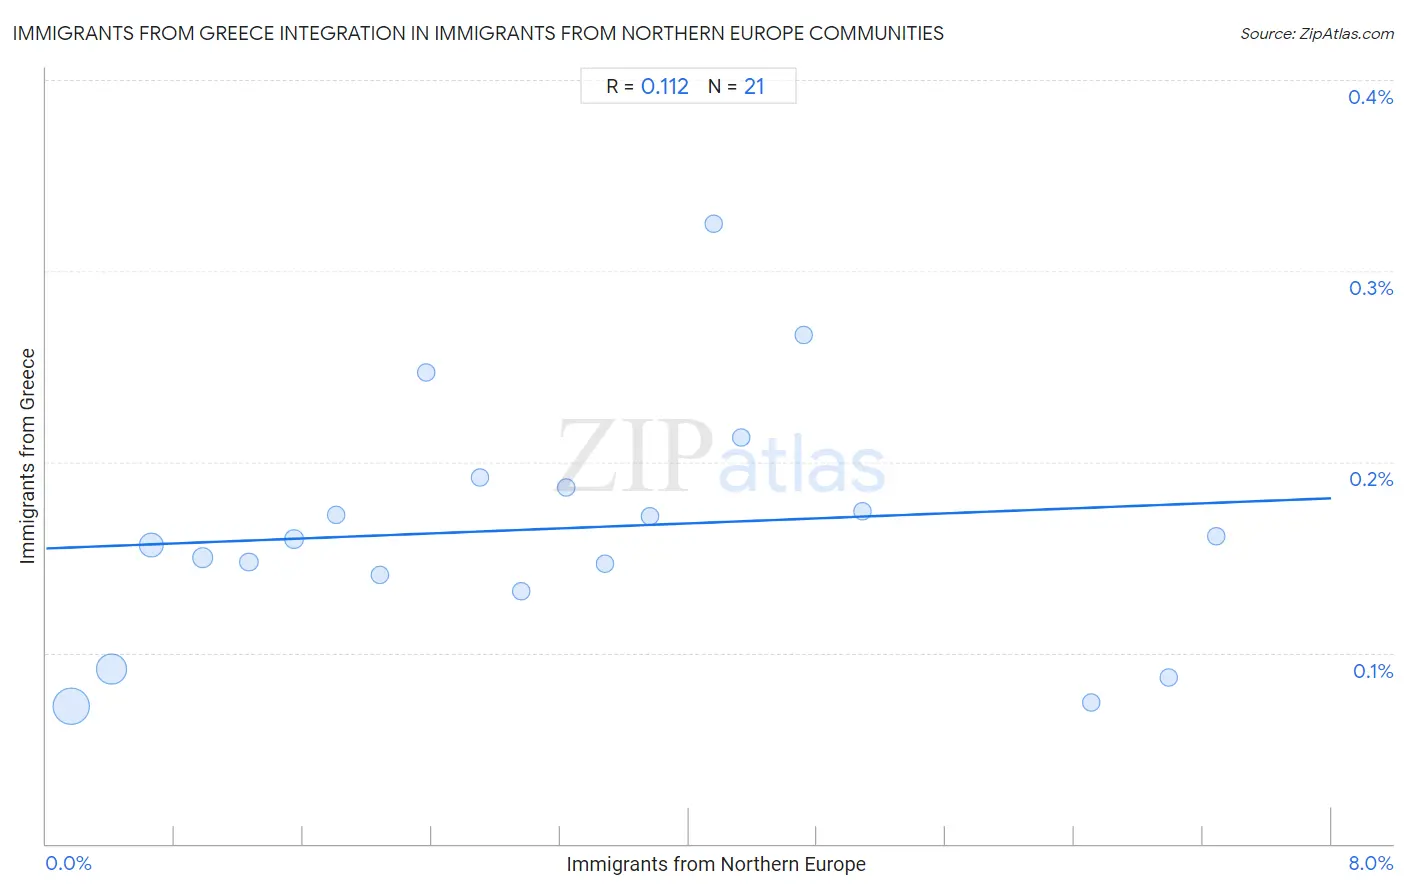 Immigrants from Northern Europe Integration in Immigrants from Greece Communities